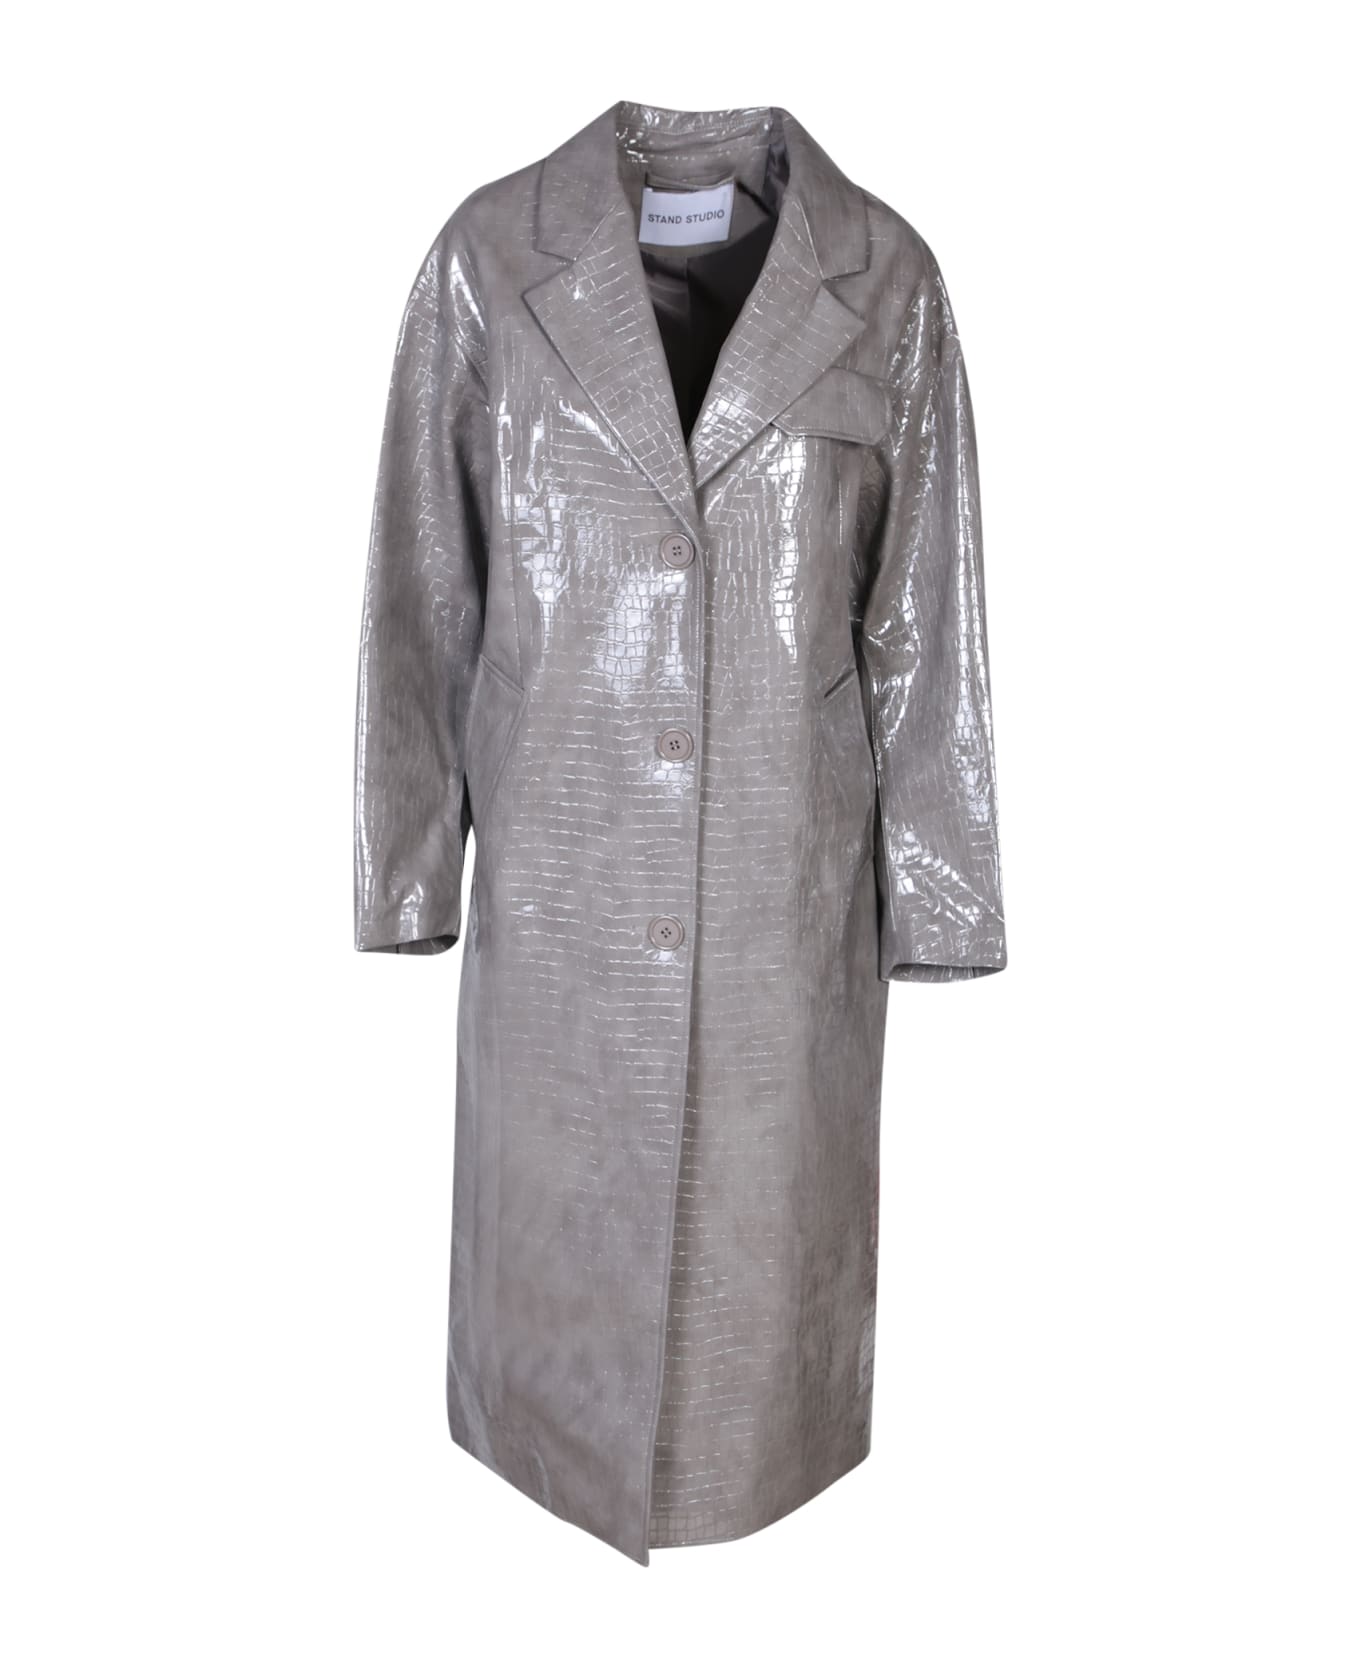 STAND STUDIO Haylo Croco Grey Faux Leather Trench - Grey